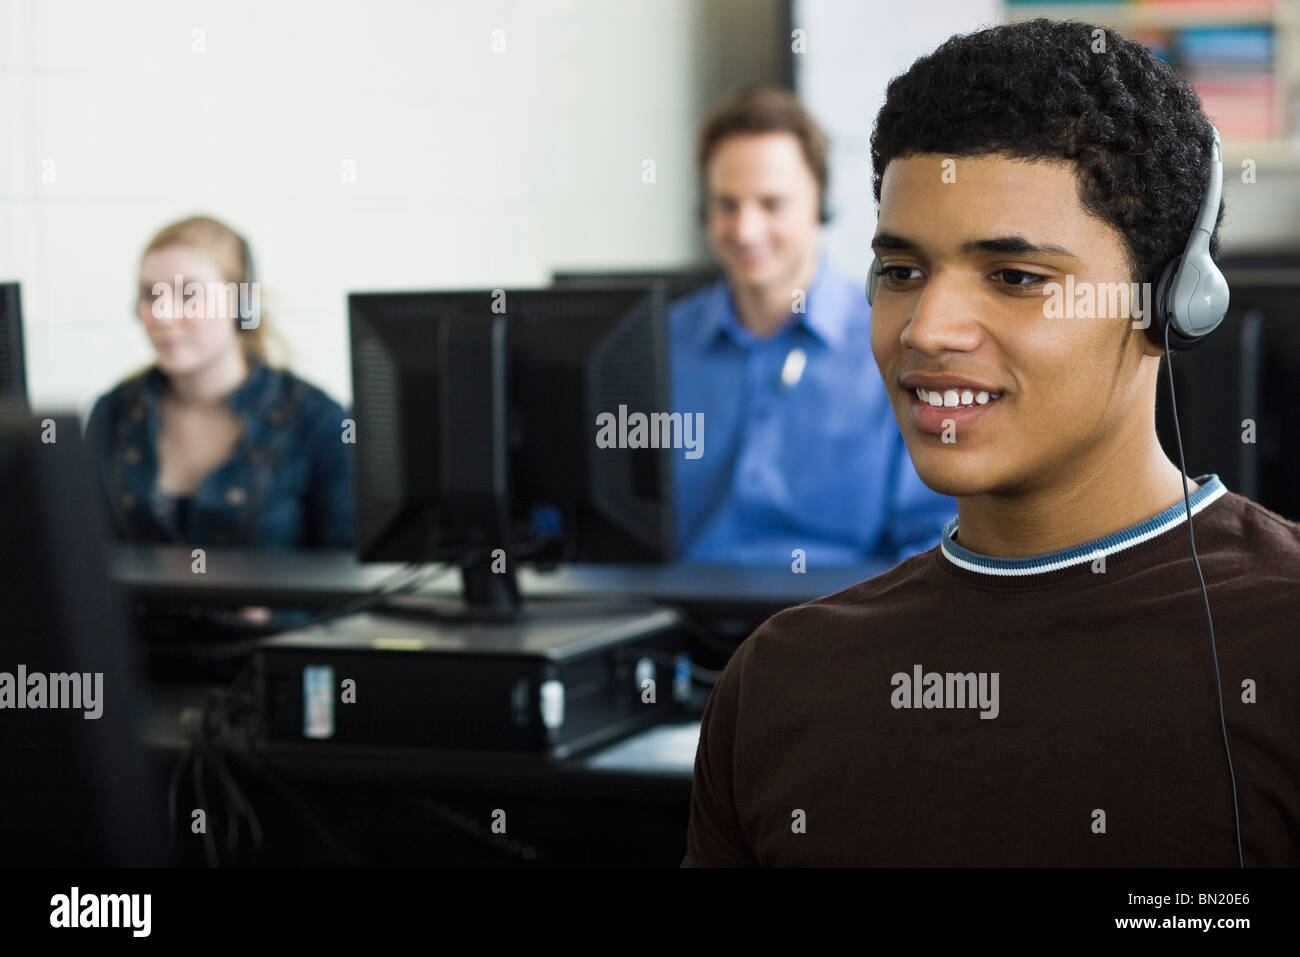 Student listening to headphones in computer lab Banque D'Images